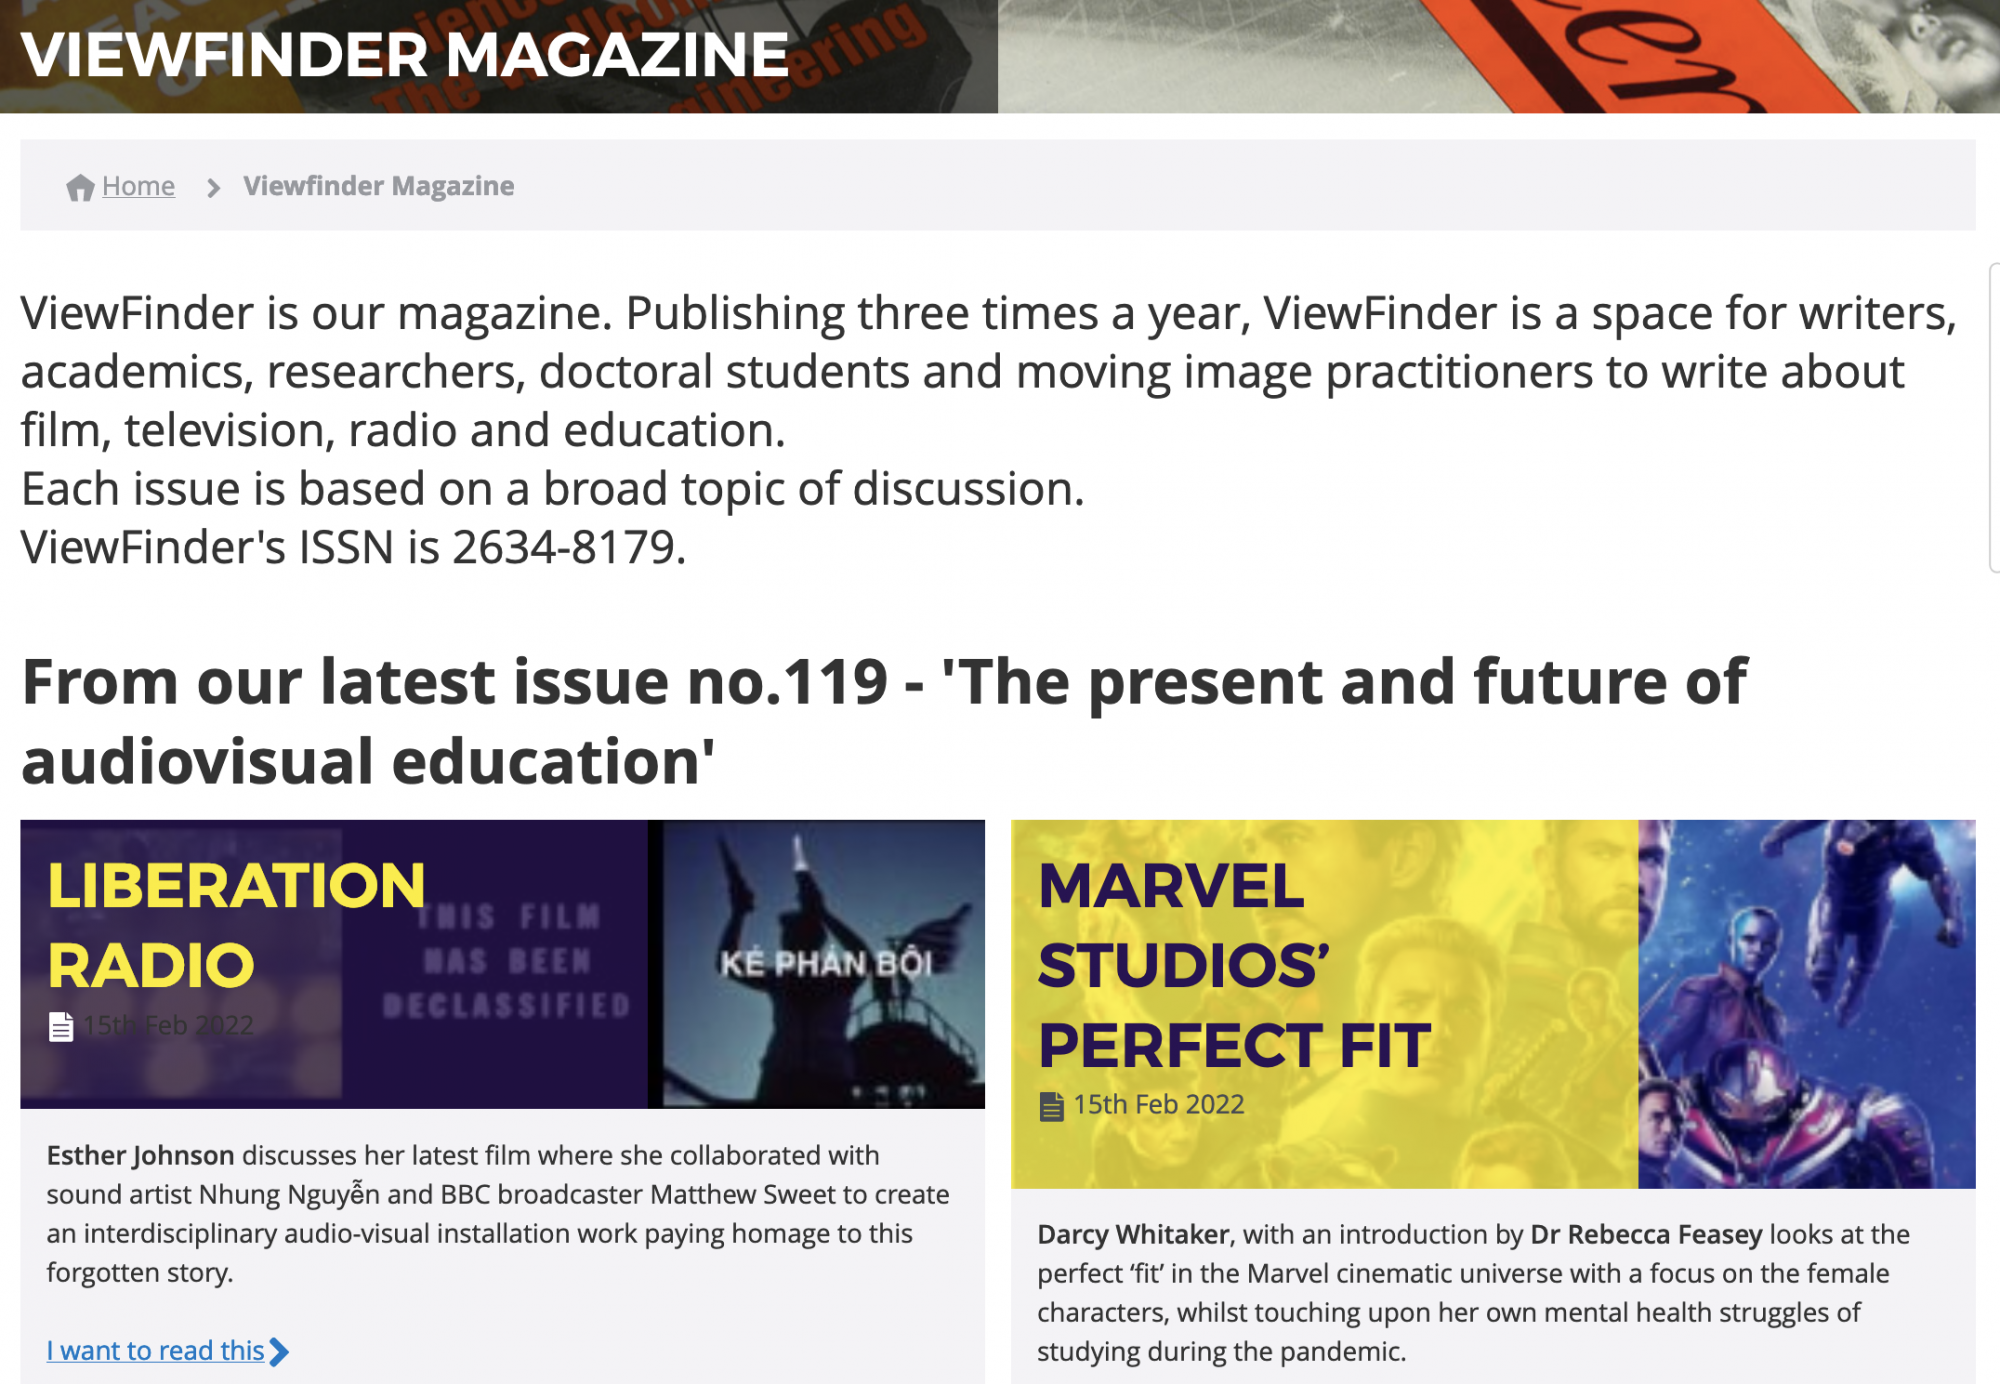 Liberation Radio article in Learning on Screen Viewfinder Magazine 2022